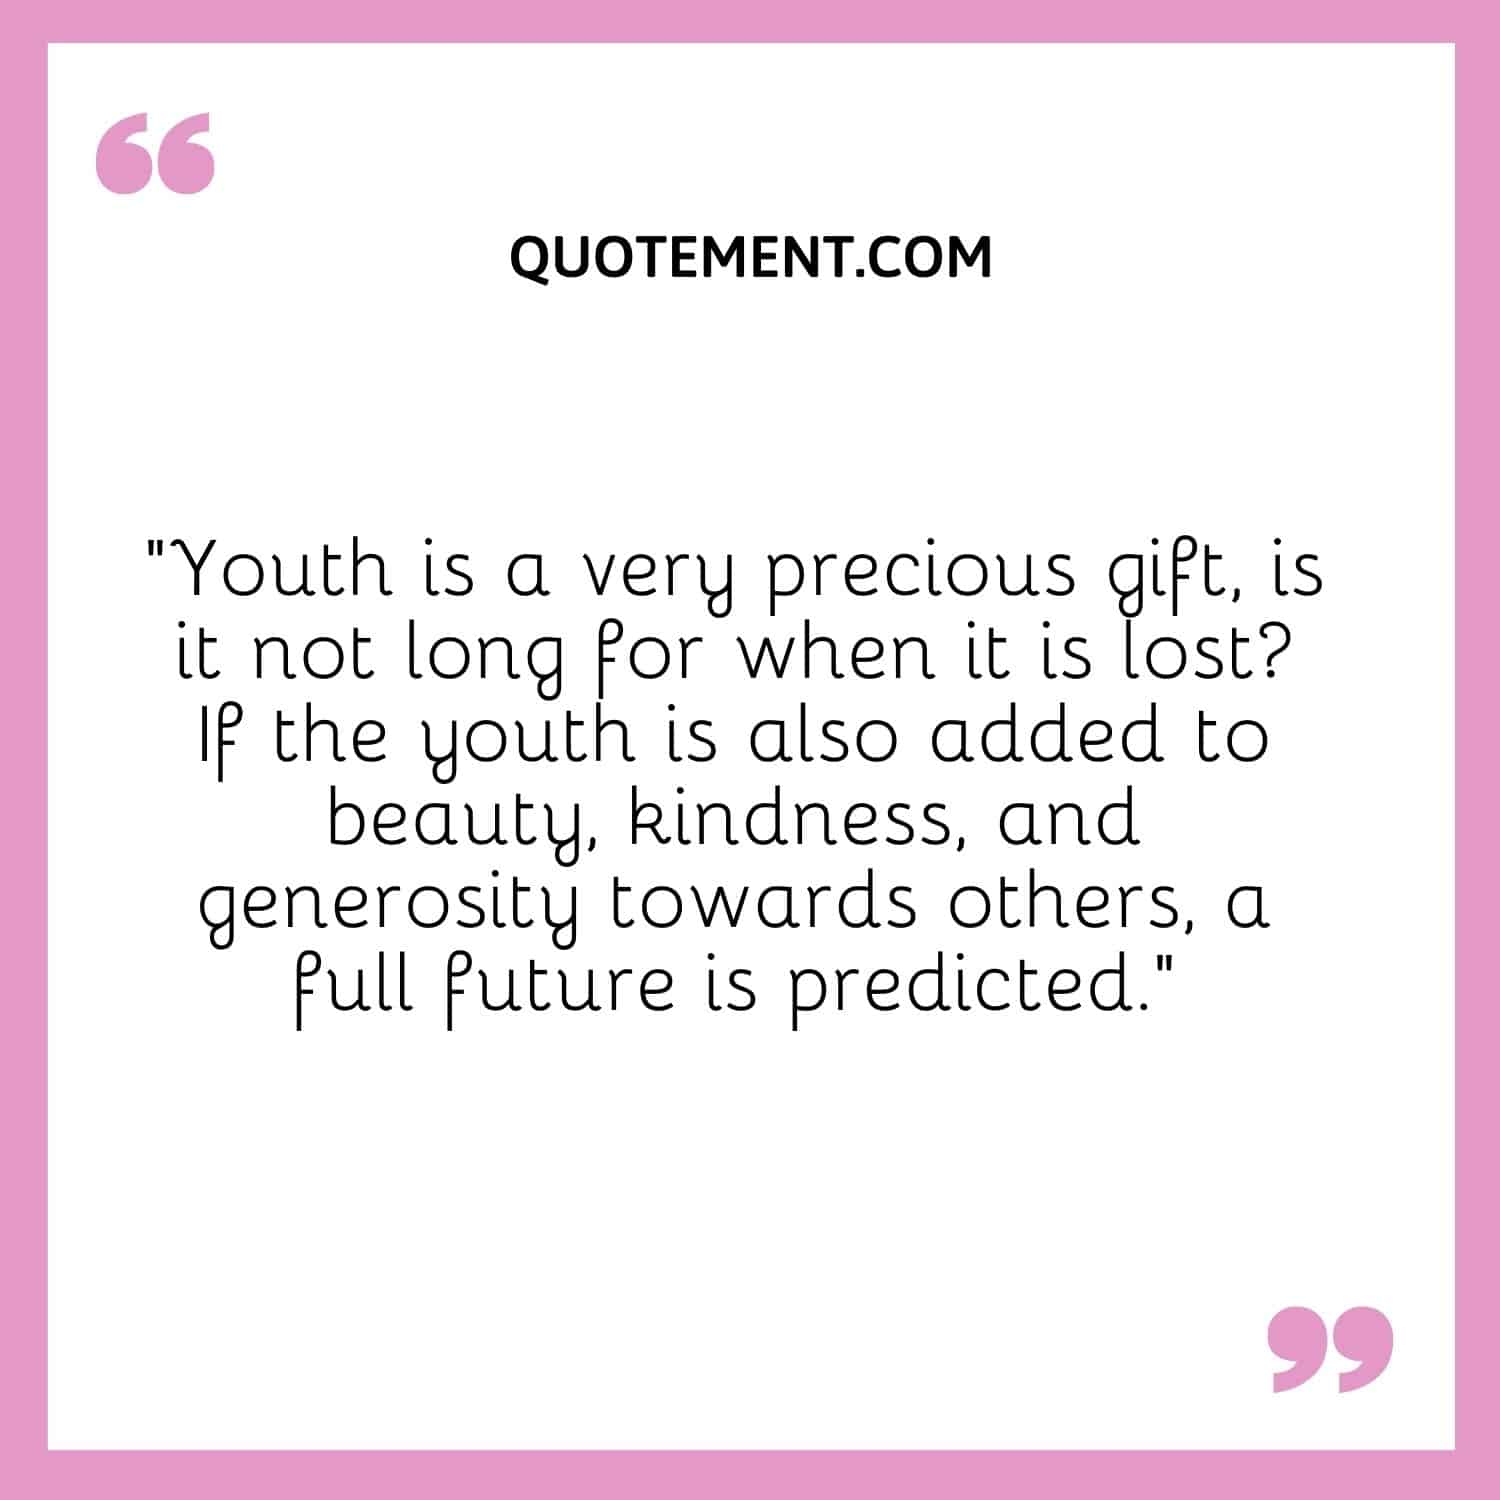 Youth is a very precious gift,